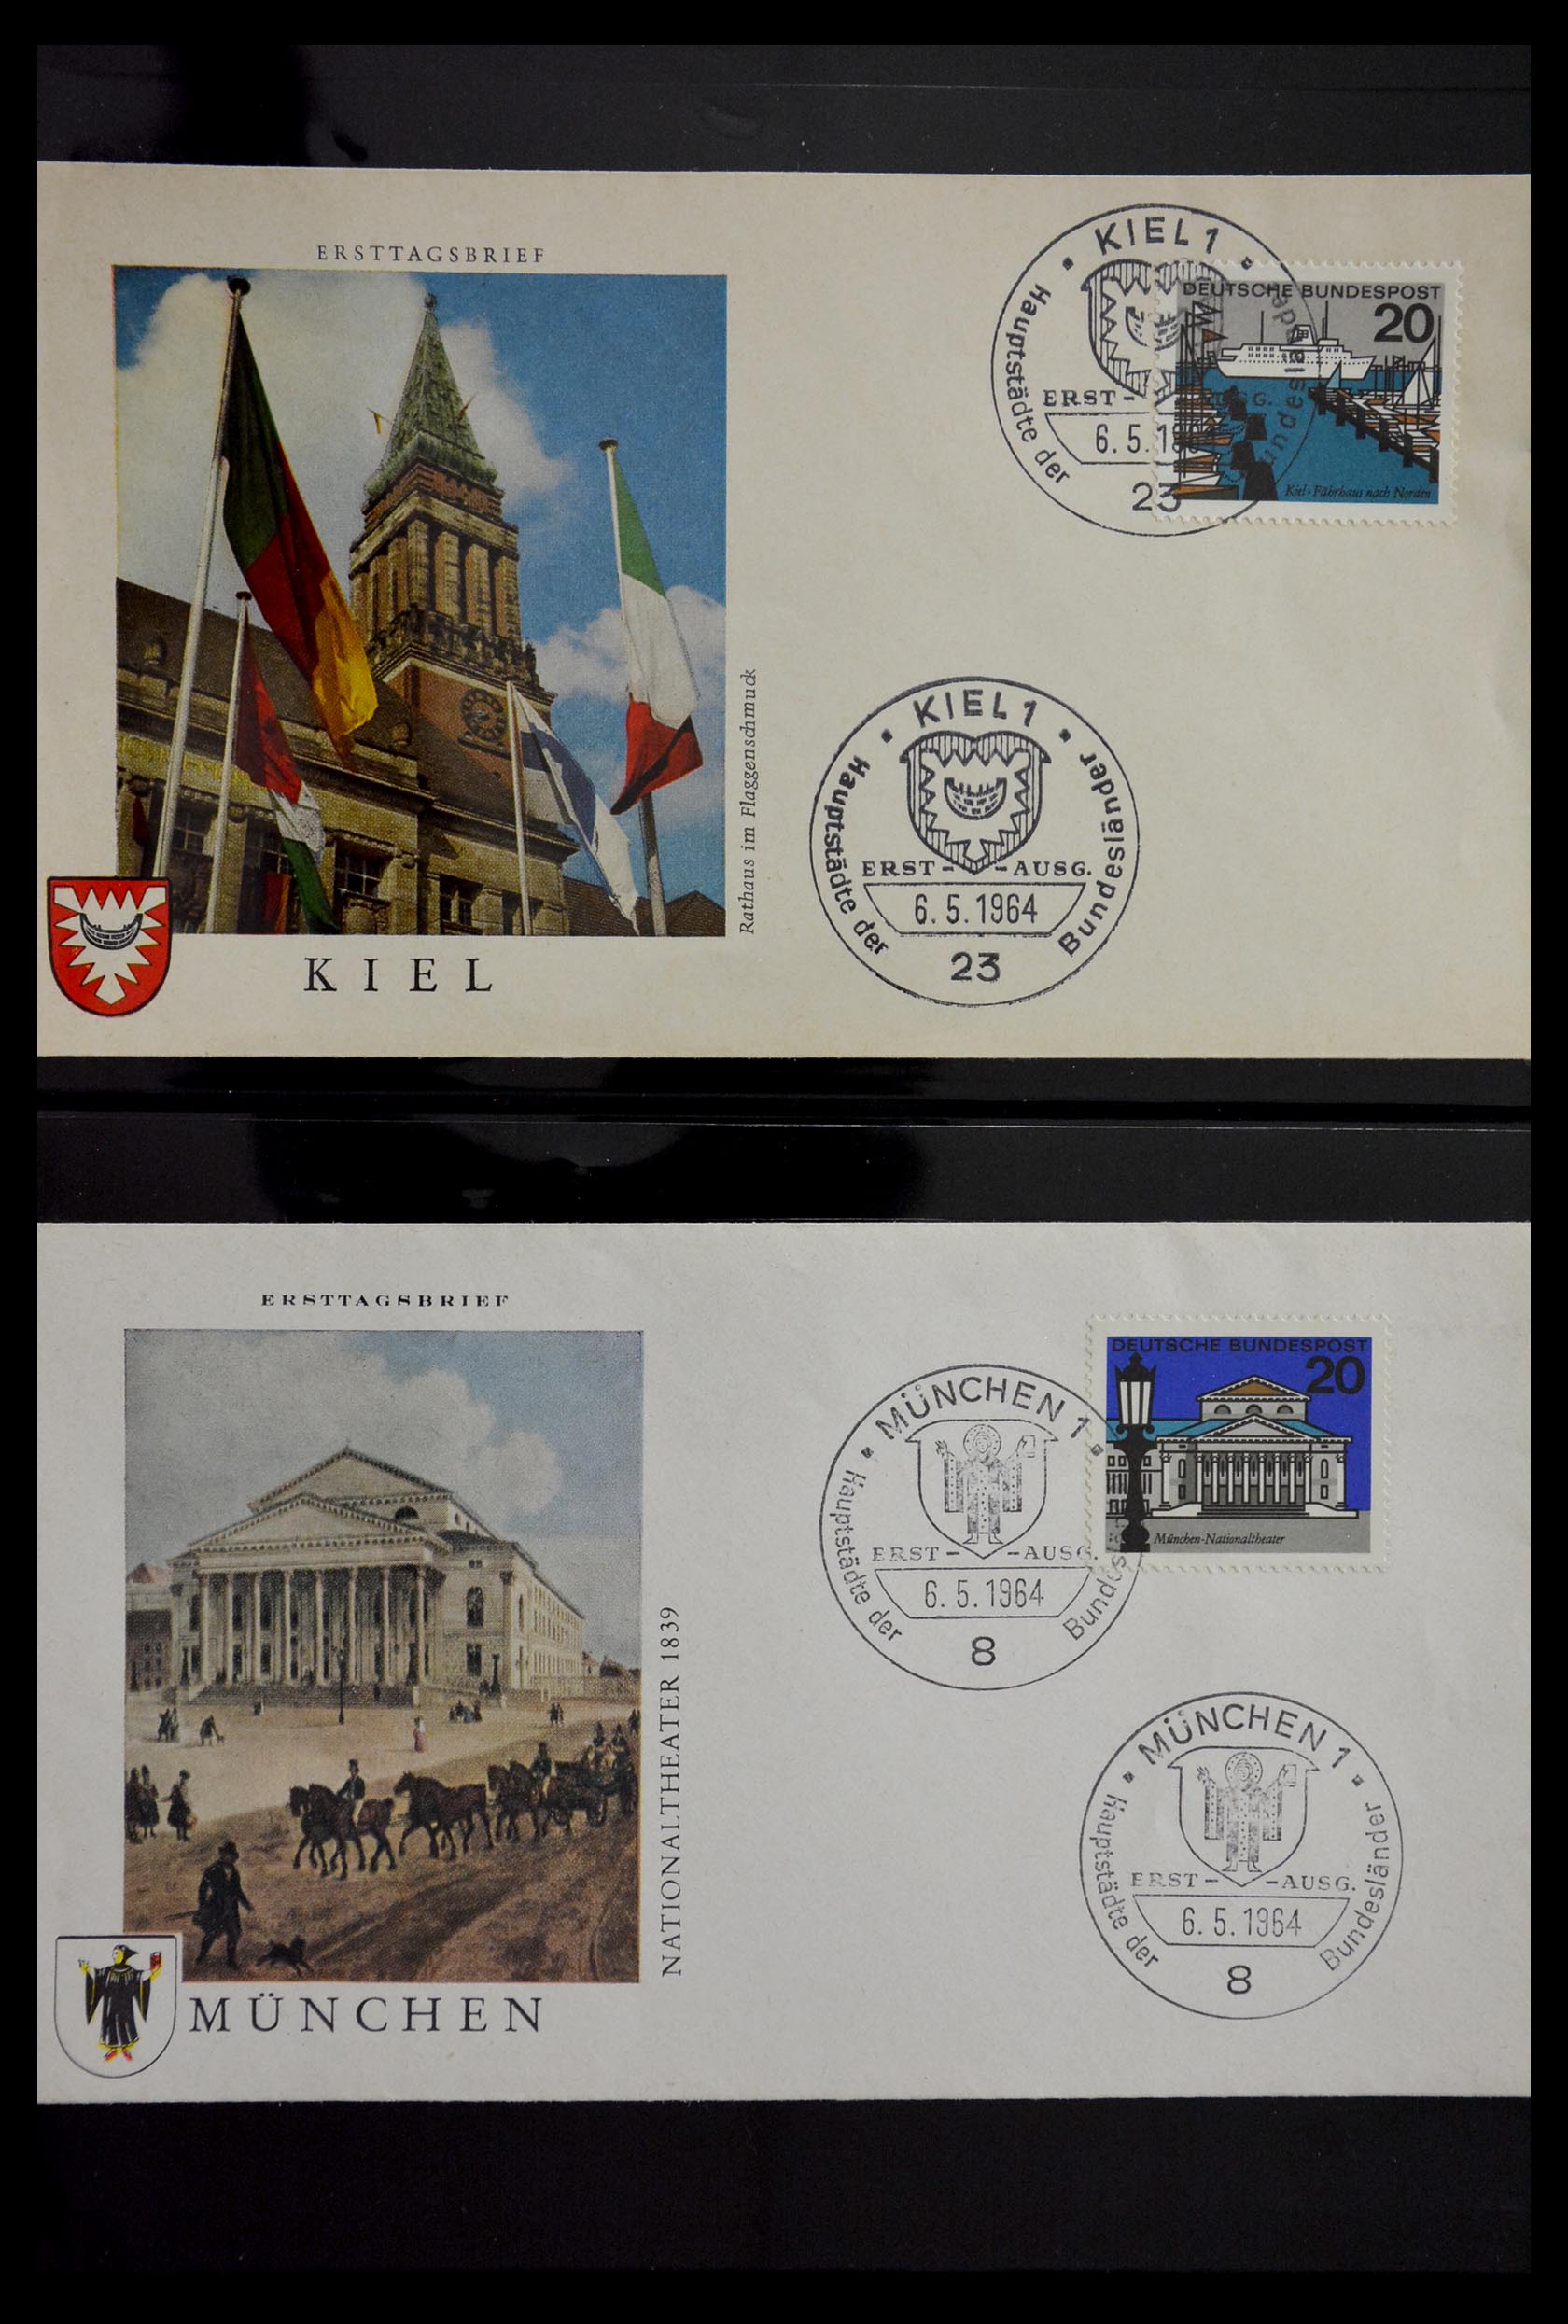 29382 029 - 29382 Germany covers and FDC's 1936-1965.